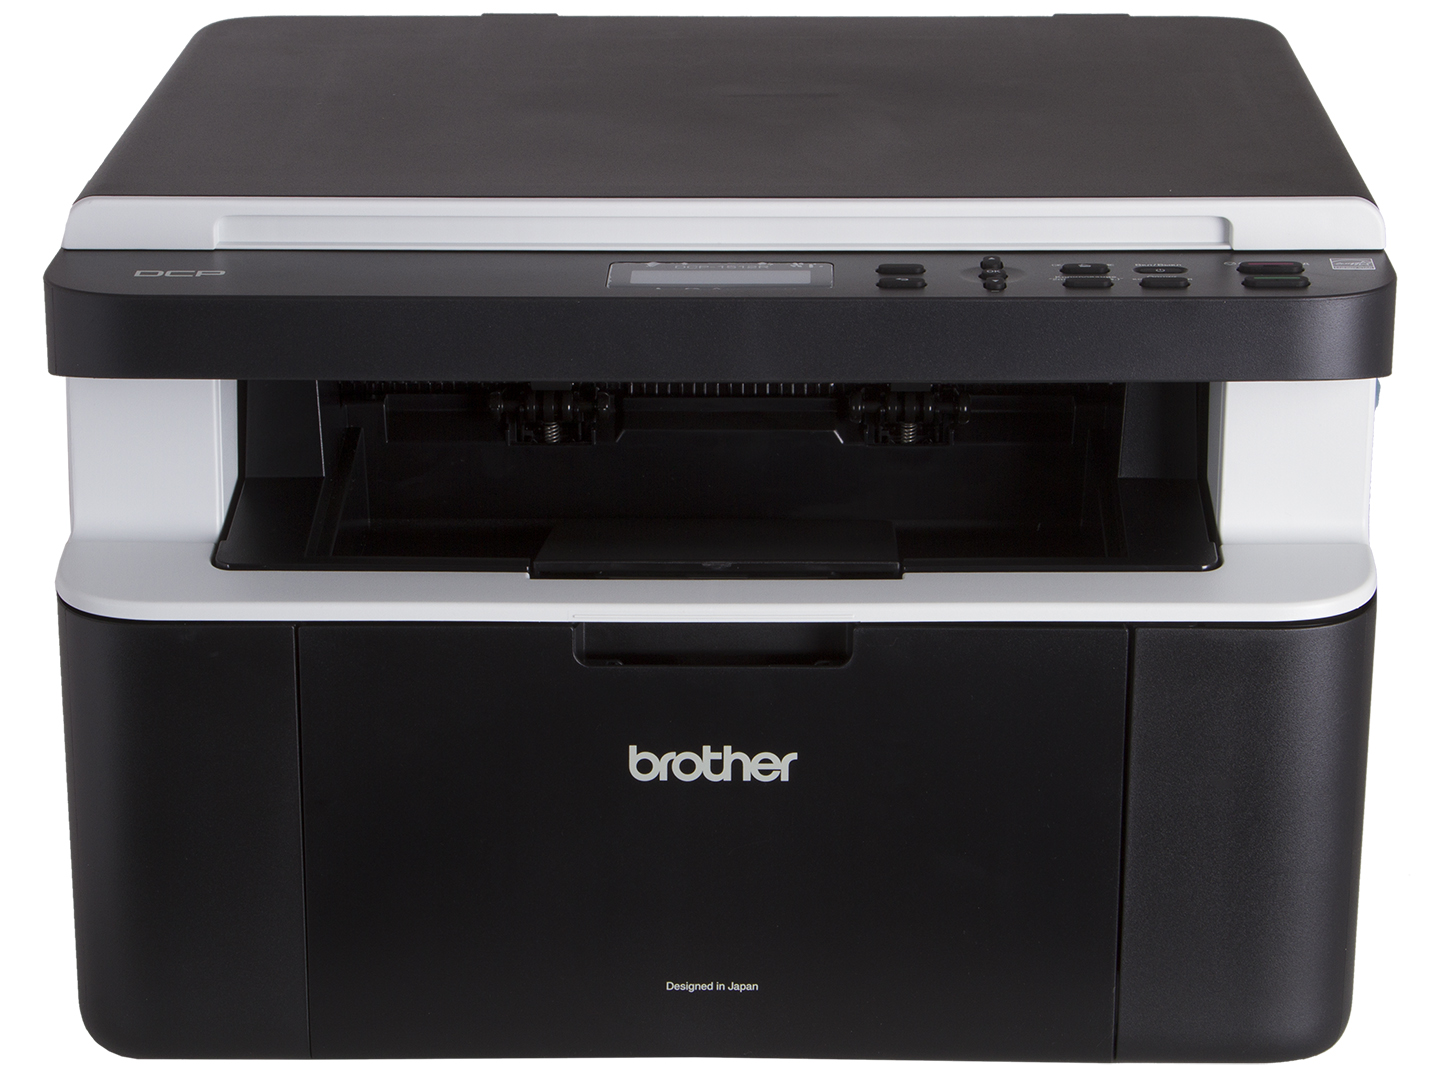 Brother dcp 10. Brother DCP-1512r. Brother 1512r. Принтер brother 1512r. МФУ бротхер 1512.